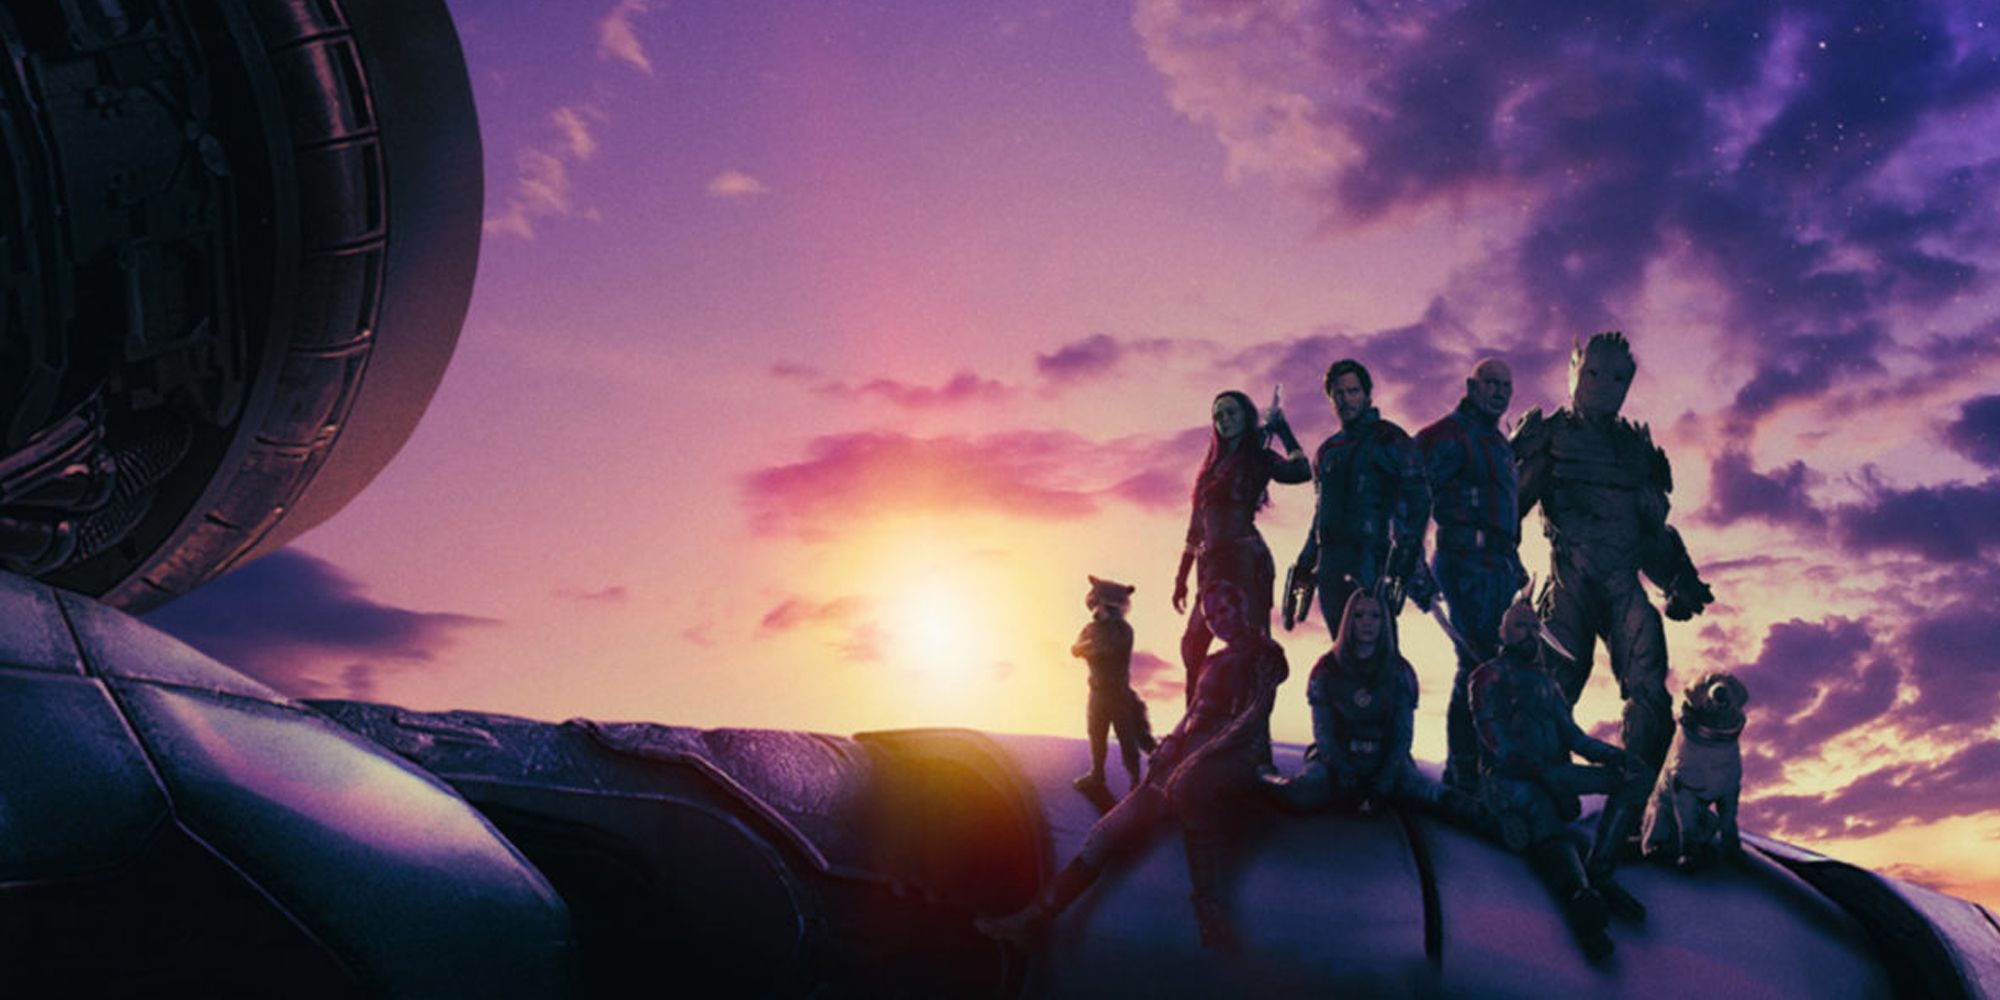 Guardians of the Galaxy Vol 3 poster showing Rocket Raccoon, Gamora, Star-Lord, Drax, Groot, Nebula, Mantis, Kraglin, and Cosmo sitting on a spaceship at sunset